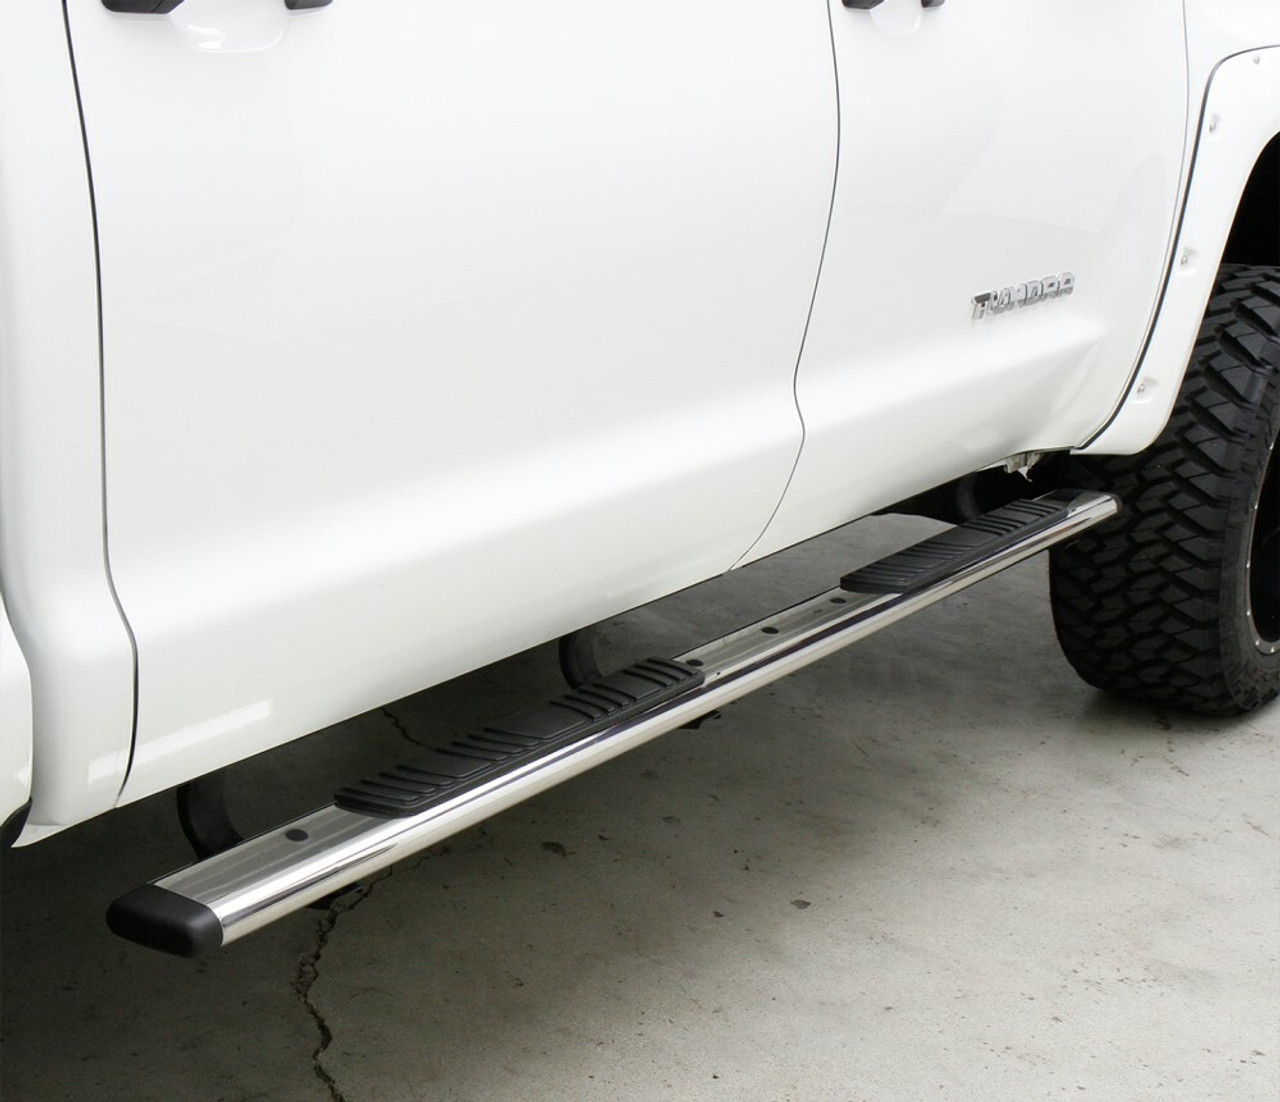 Go Rhino 685404780PS Chevrolet, Silverado 1500, 2019 - 2021, 5 inch OE Xtreme Low Profile - Complete Kit: Stainless steel, Polished, 650080PS side bars + 6840475 OE Xtreme Brackets. 5 inch wide x 80 inch long side bars, New Body Style Only